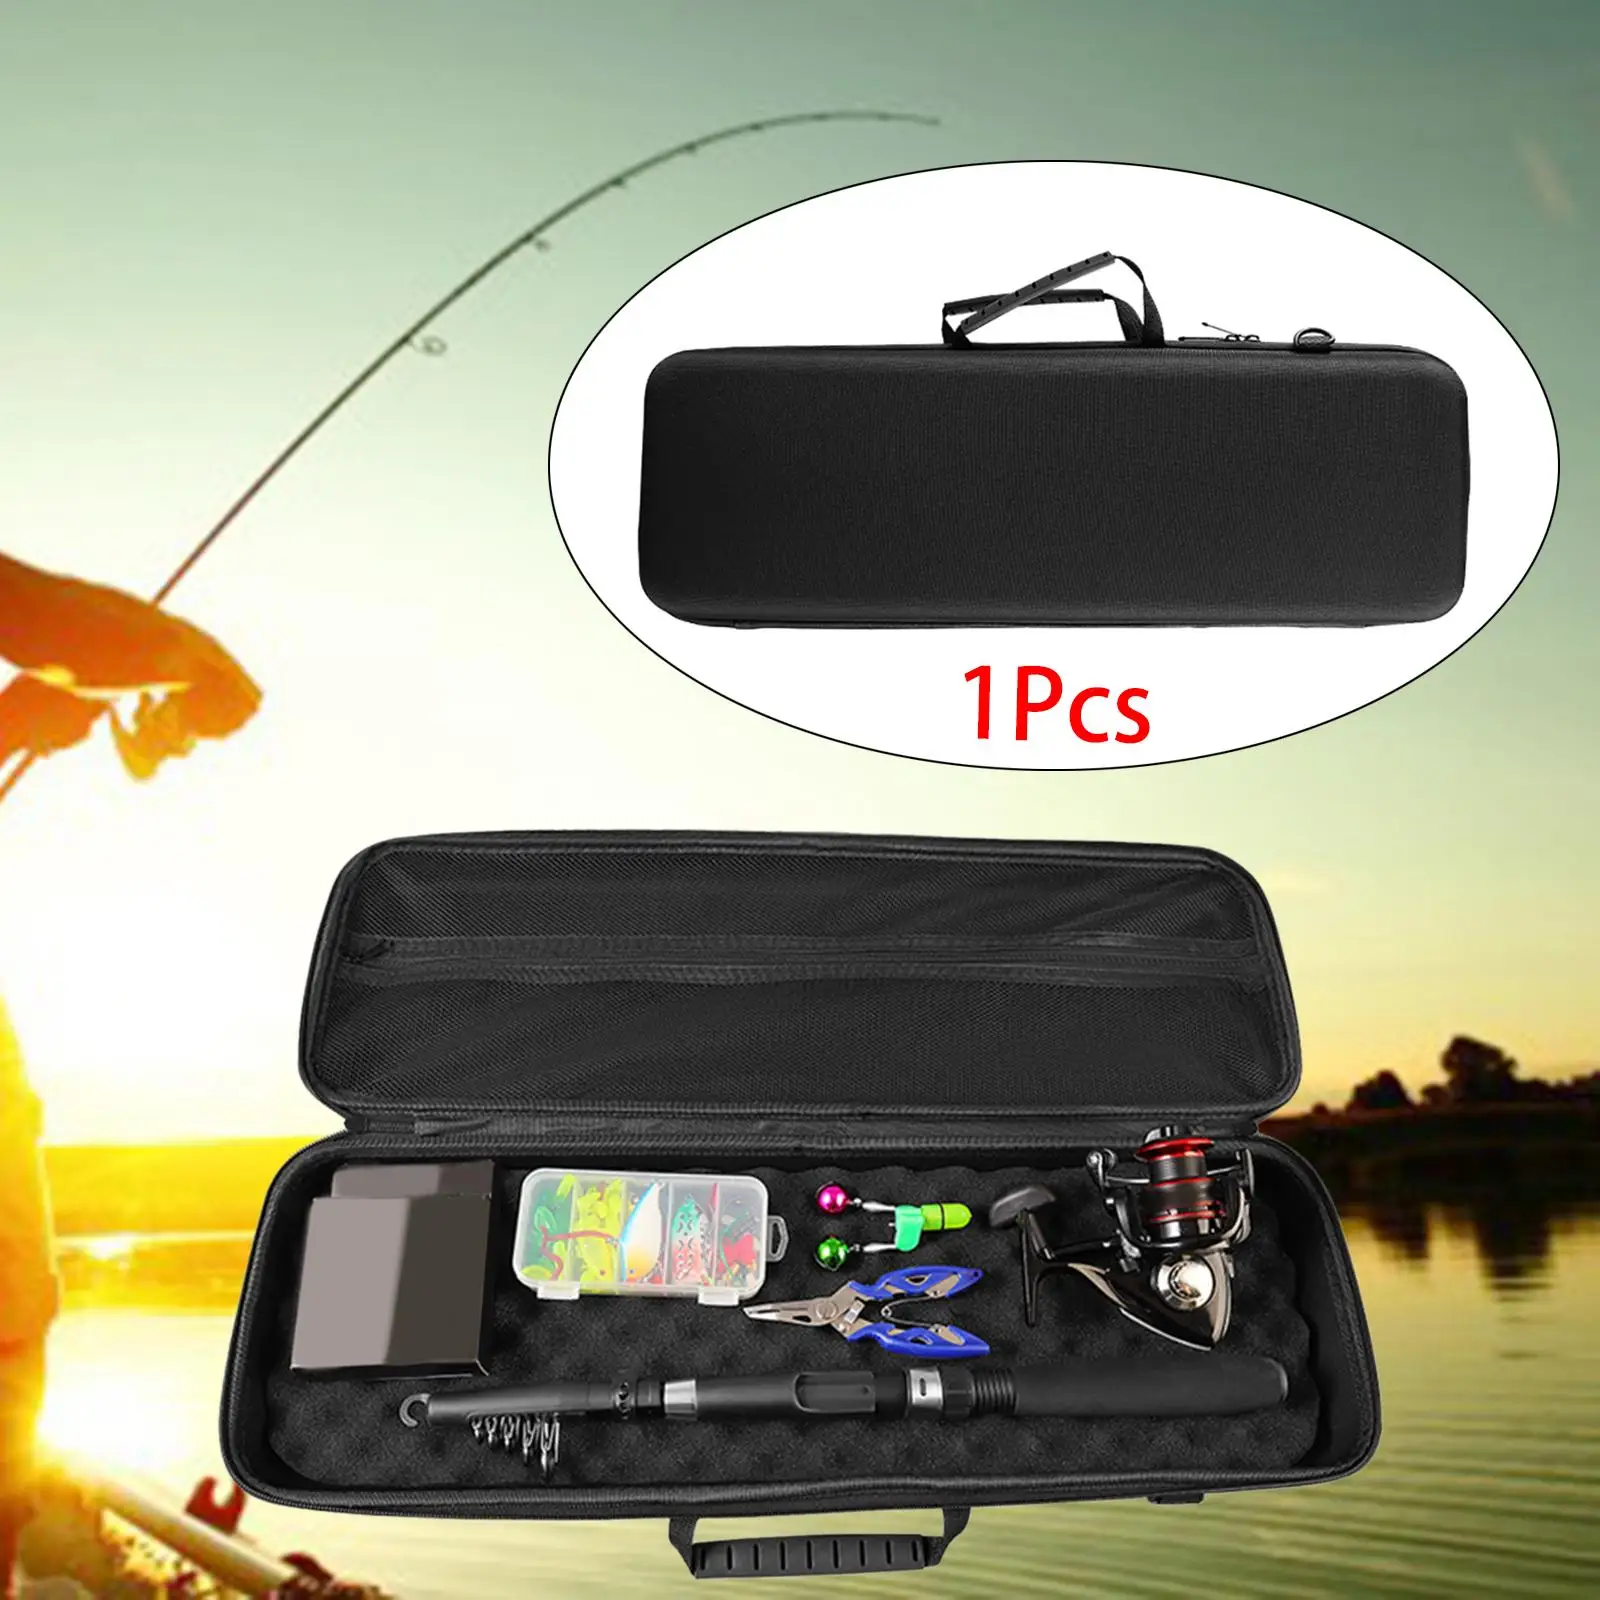 Fishing Rod Reel Bag Accessories Container Outdoor Gear Shockproof Sturdy Wear Resistance with Strap Portable Travel Carry Case